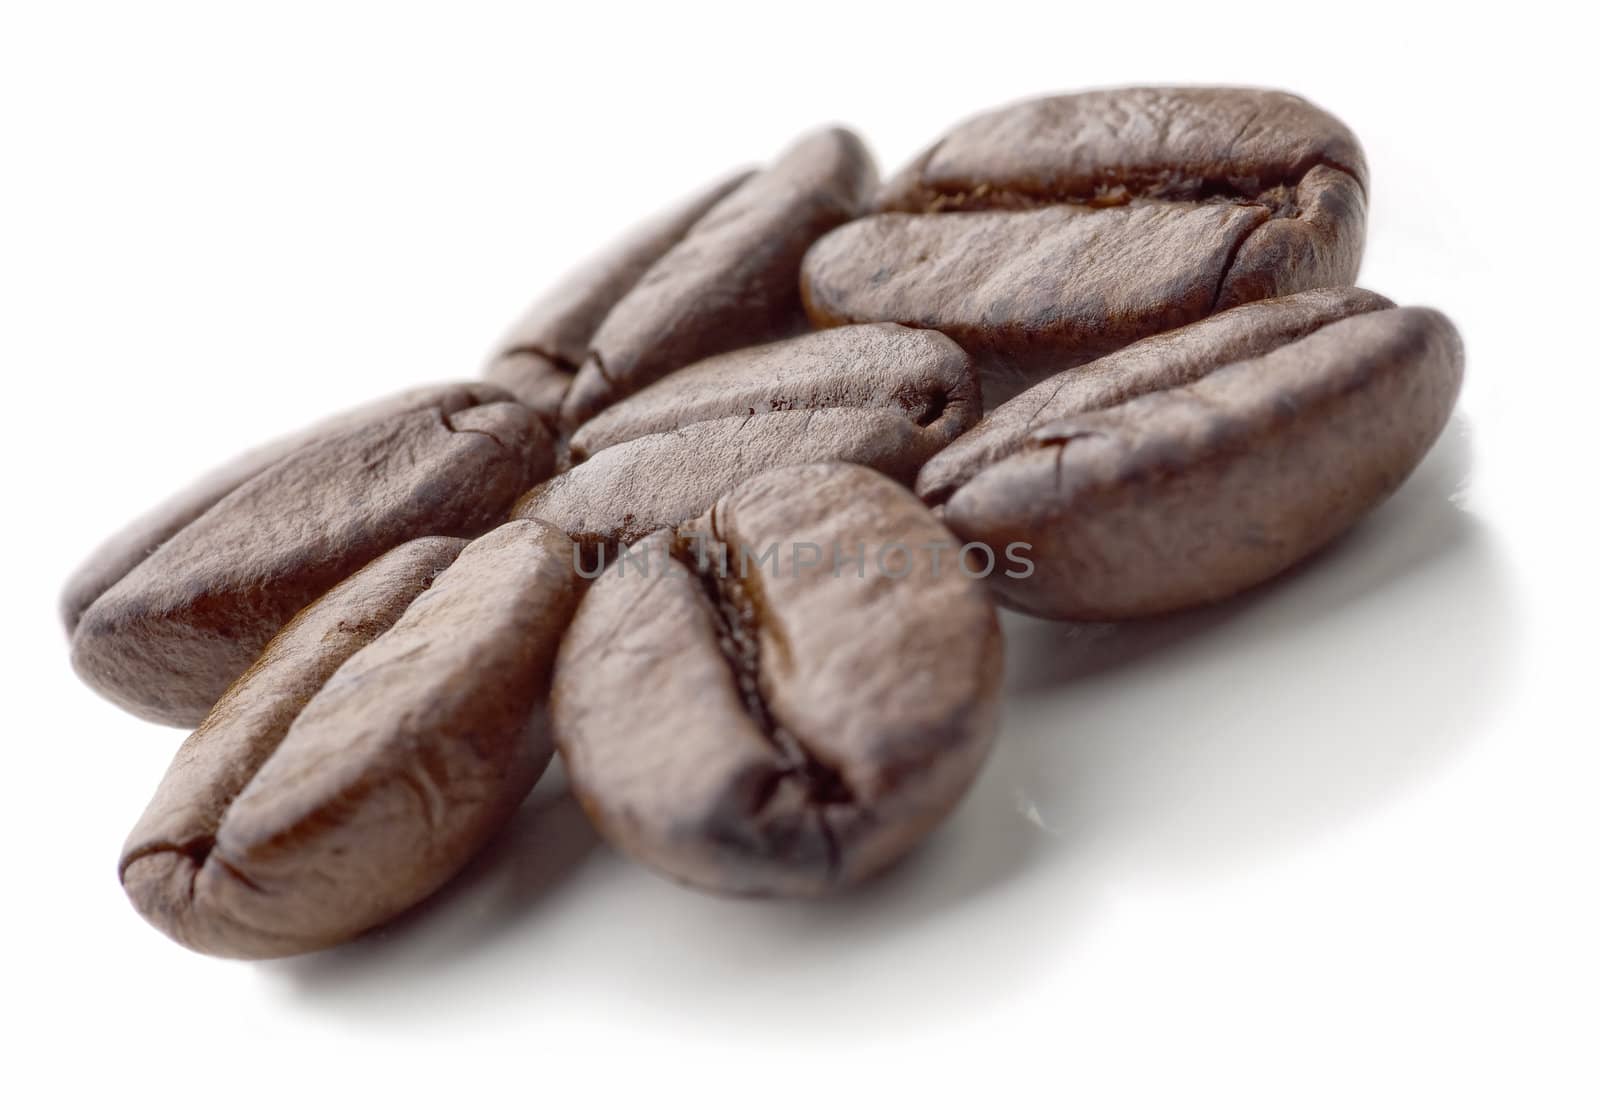 Seven coffee beans on the white background. Flower made of coffee beans. Soft focus.